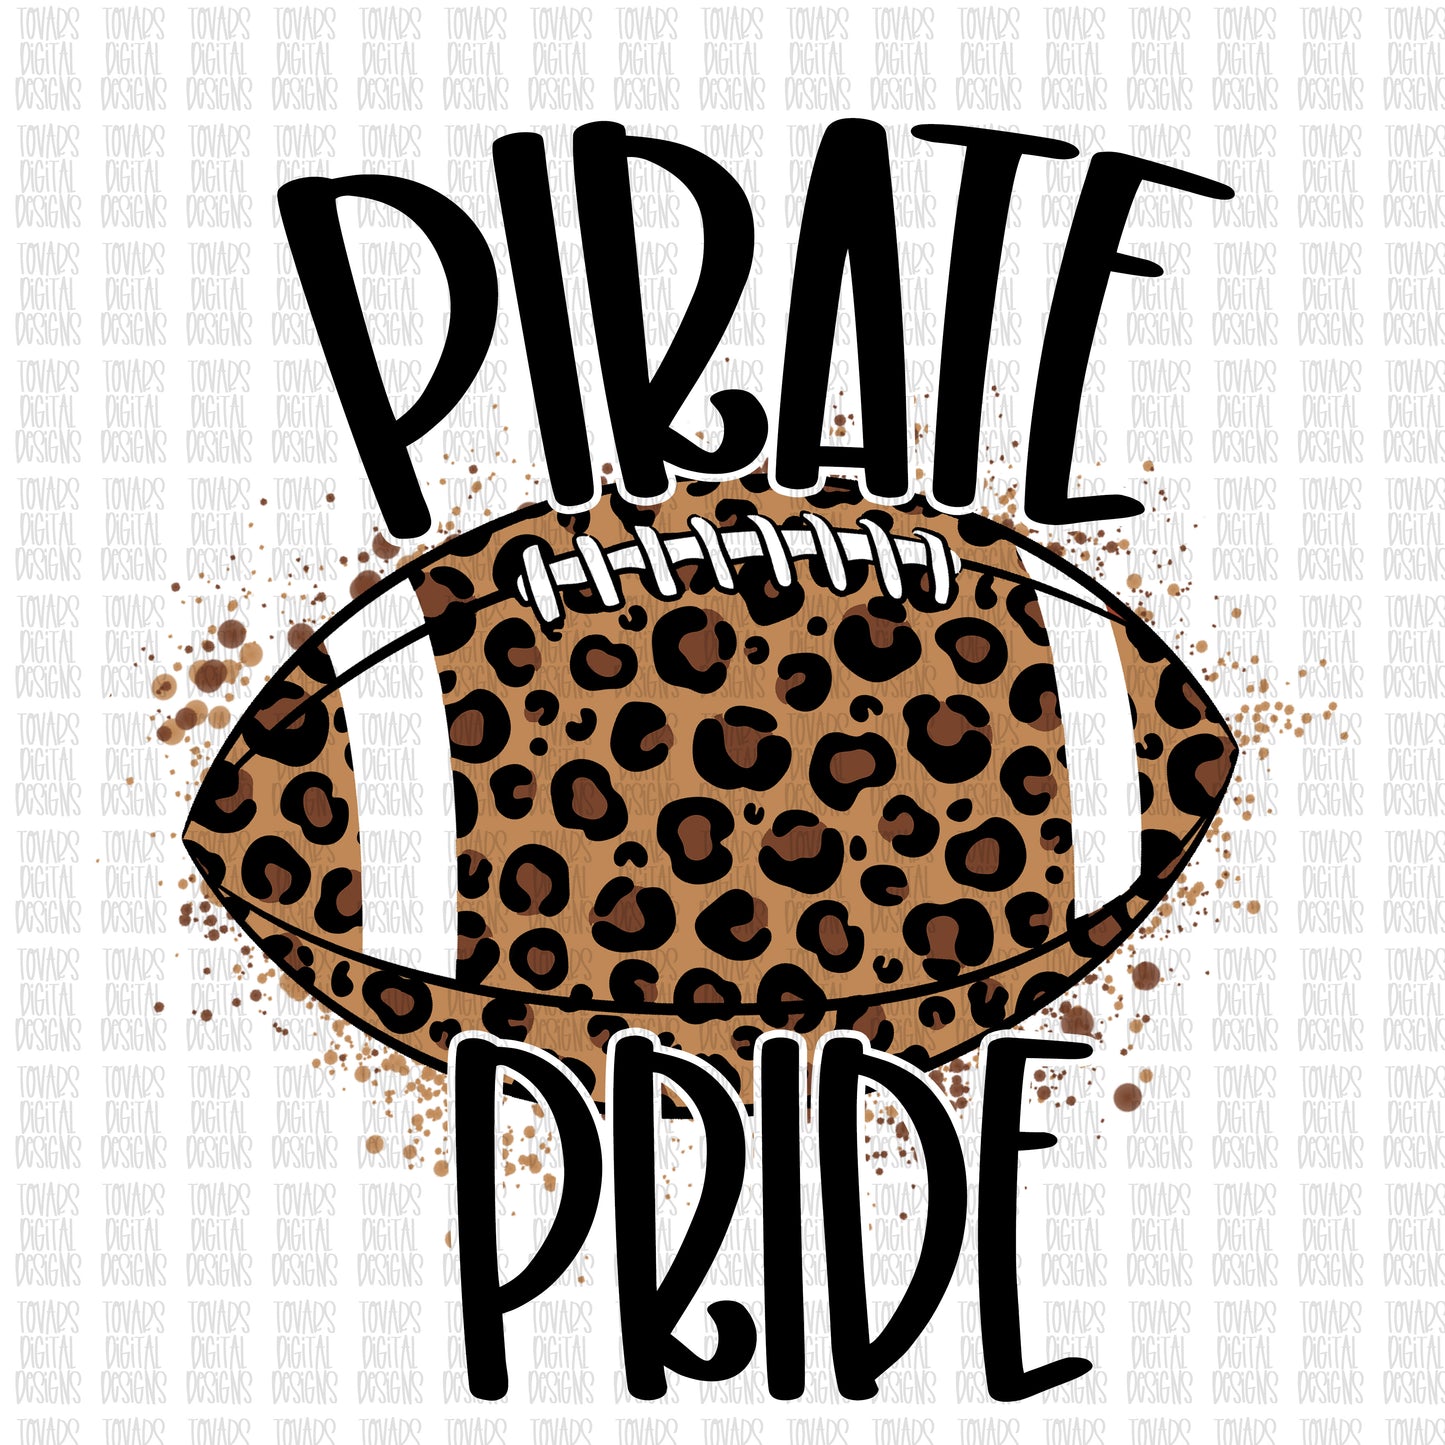 Pirate Pride Football, Pirate Football png, Pirate pride png, leopard football, leopard football png, sublimation design, dtg printing